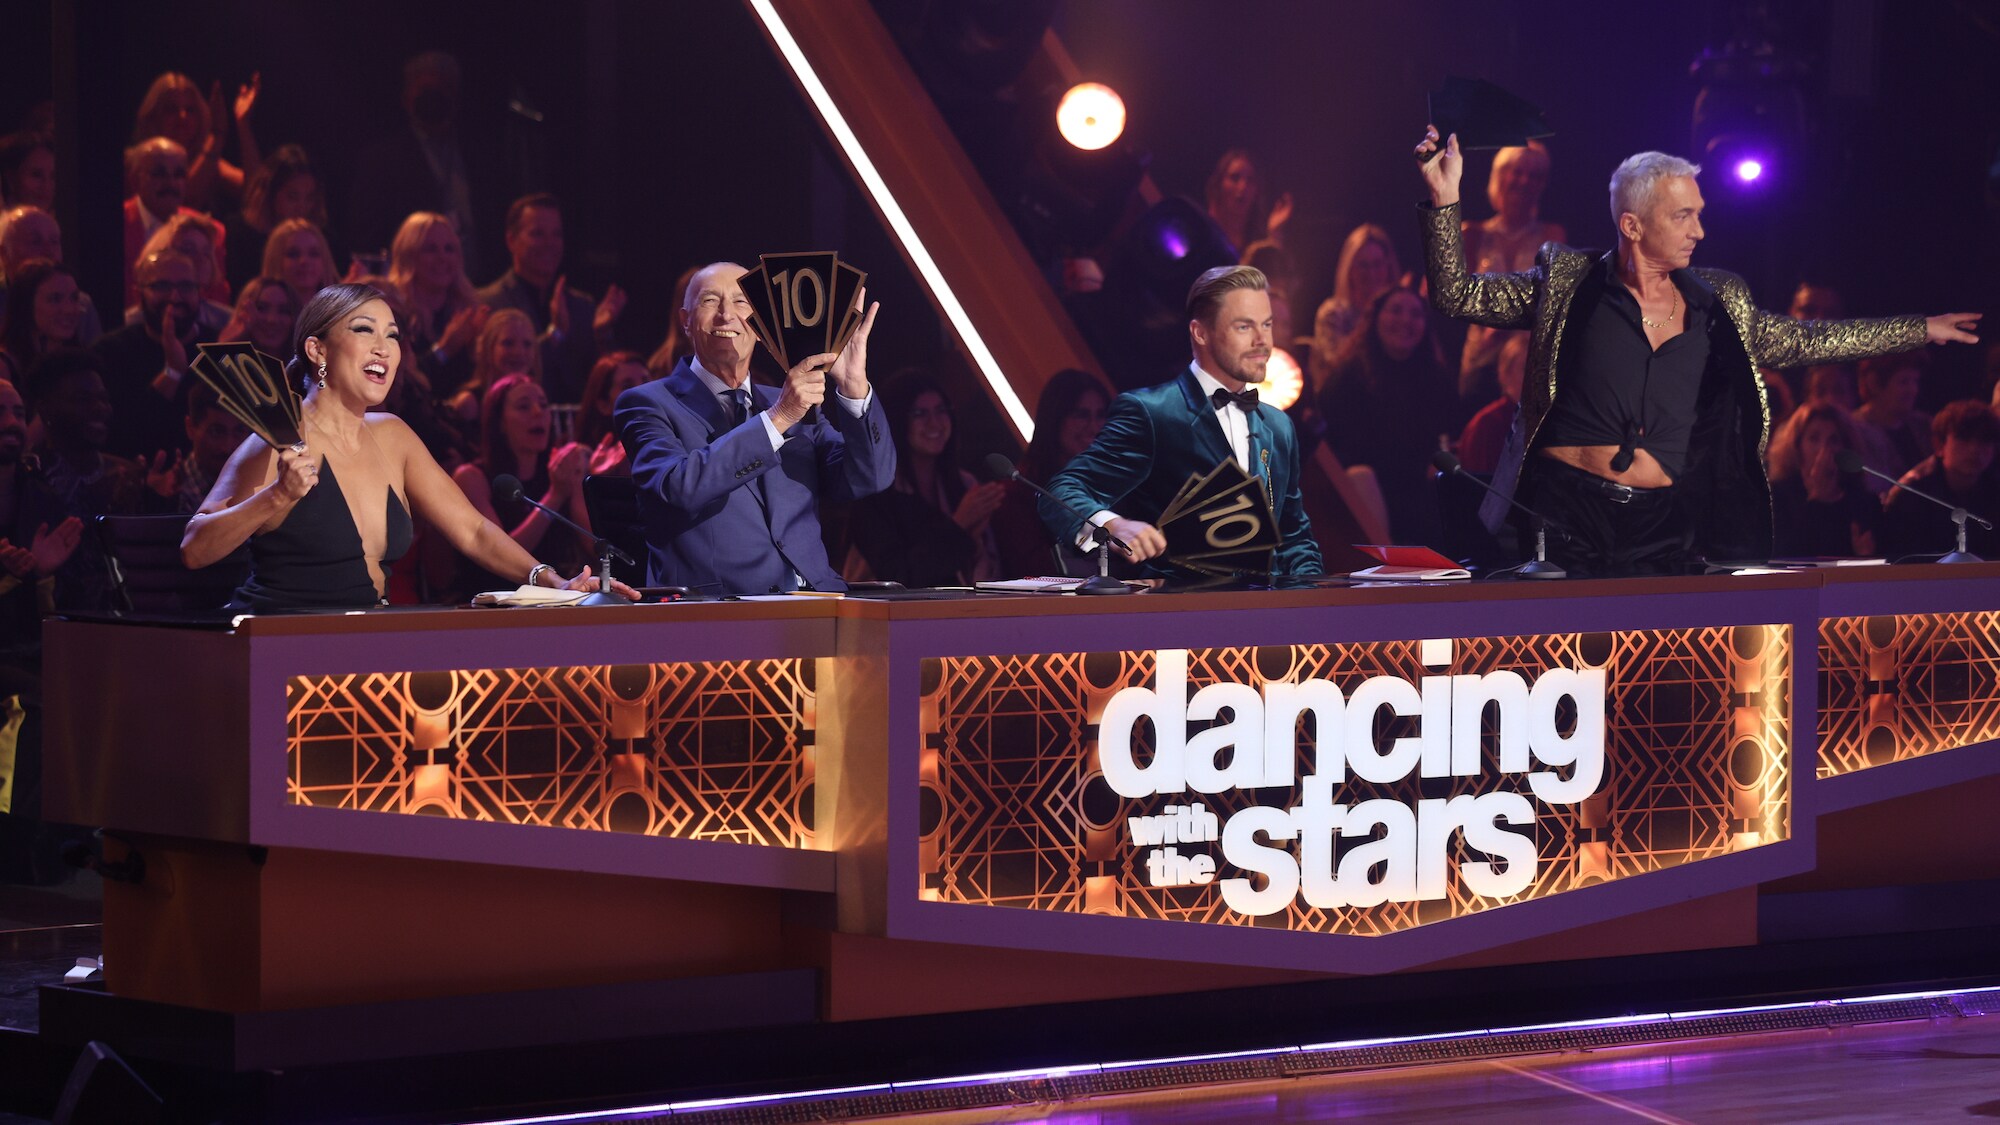 DANCING WITH THE STARS - “Semi-Finals” – The mirrorball competition heats up as the six remaining contestants head into the “Semi-Finals.” Each couple will perform two all-new routines as they fight for a spot in the finale. A new episode of “Dancing with the Stars” will stream live MONDAY, NOV. 14 (8:00pm ET / 5:00pm PT), on Disney+. (ABC/Raymond Liu) CARRIE ANN INABA, LEN GOODMAN, DEREK HOUGH, BRUNO TONIOLI